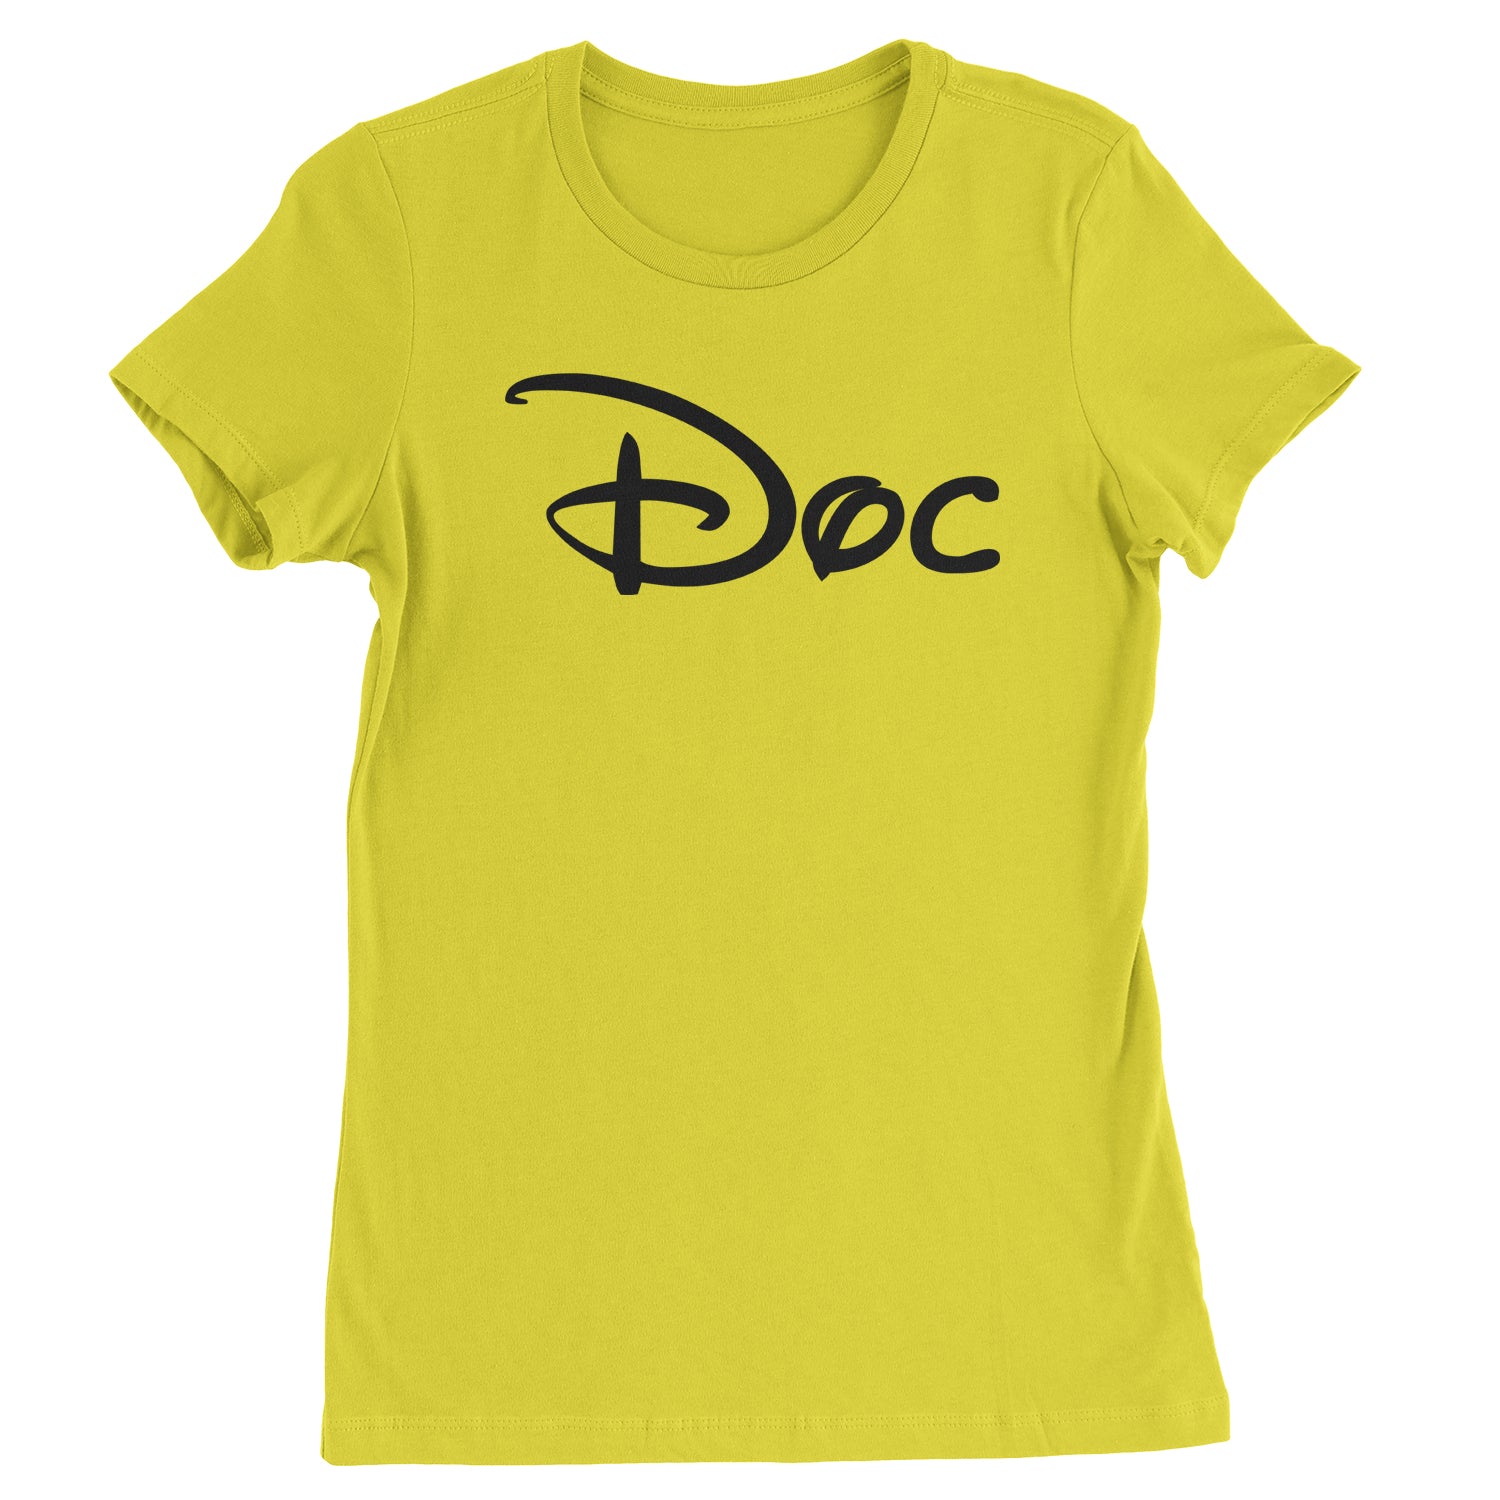 Doc - 7 Dwarfs Costume Womens T-shirt and, costume, dwarfs, group, halloween, matching, seven, snow, the, white by Expression Tees